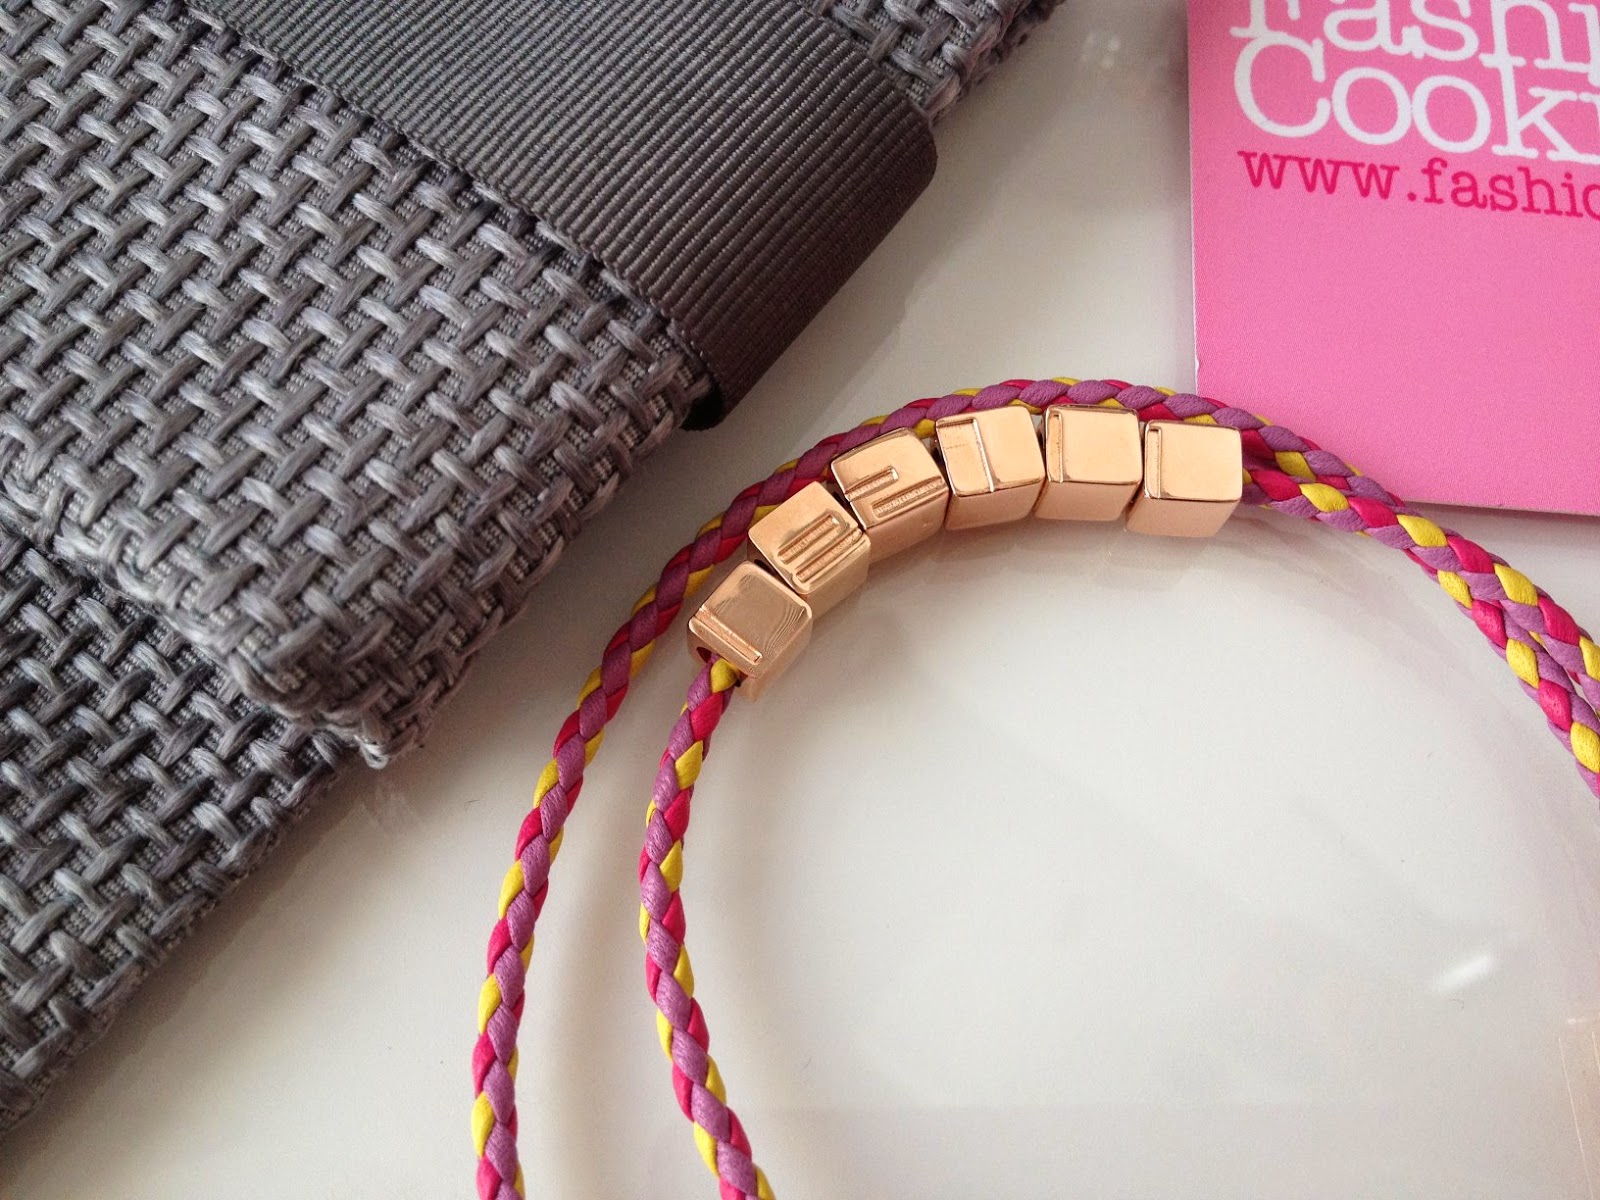 quid jewelry to remember, Fashion and Cookies, fashion blogger